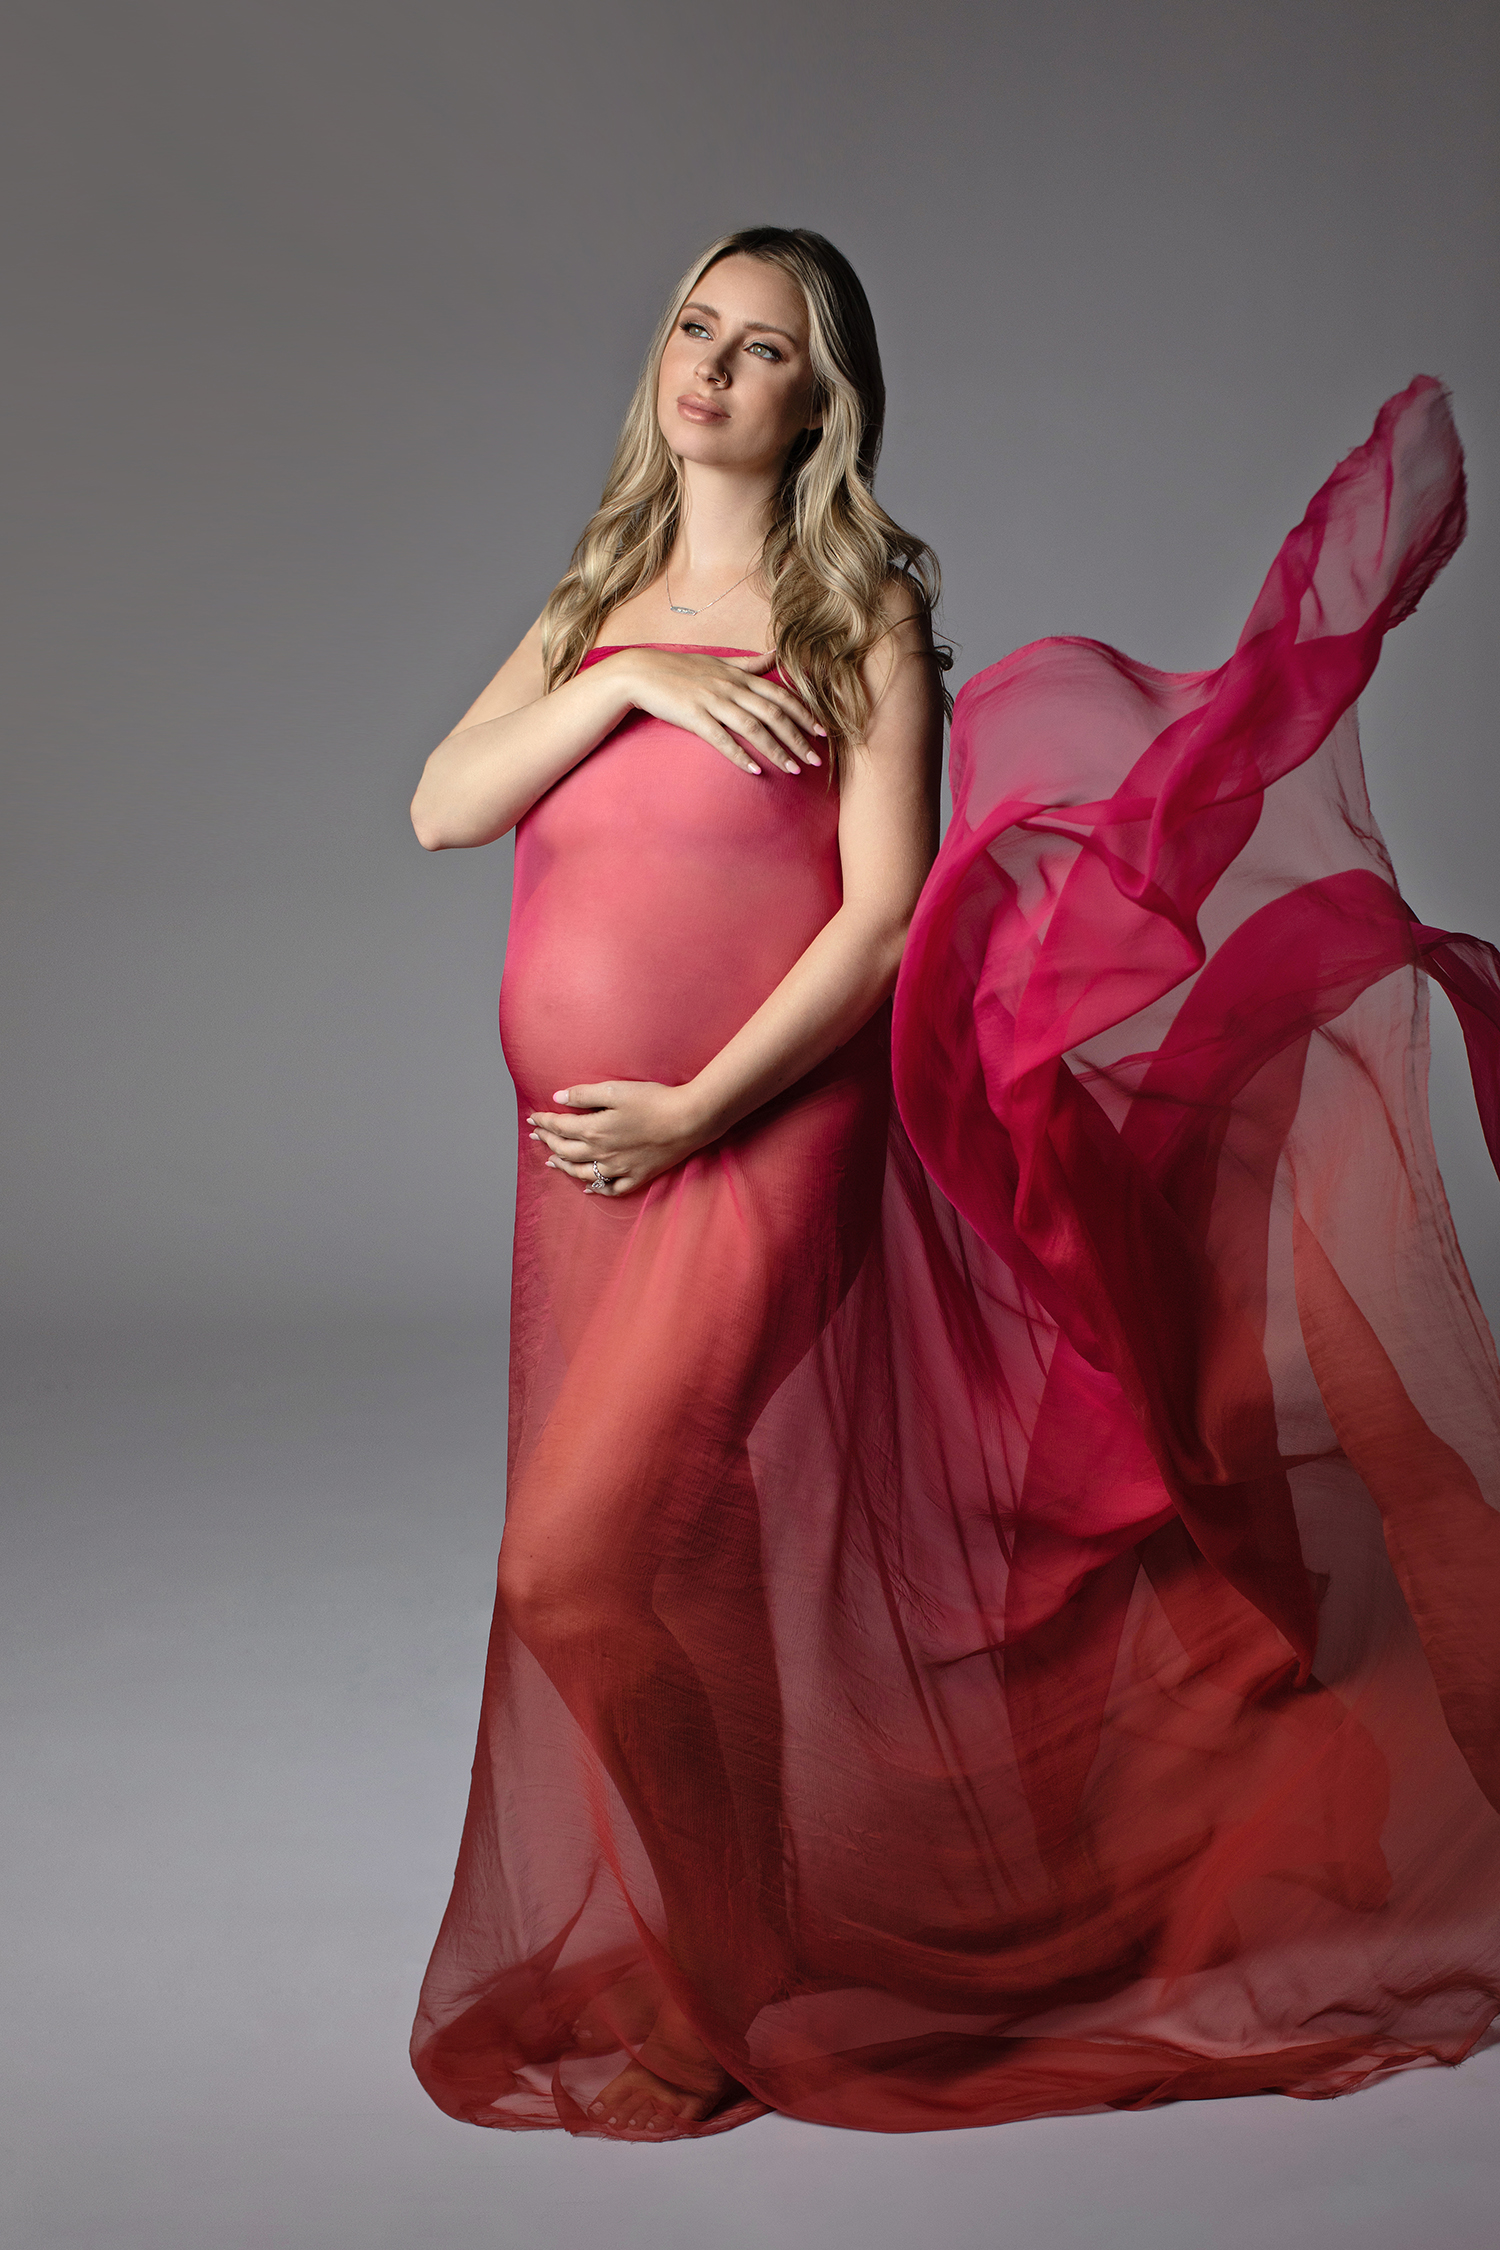 An alluring photograph of a glamorous mom-to-be, embraced by the soft fabrics of an exquisite gown, radiating luxury and grace in her maternity photoshoot.